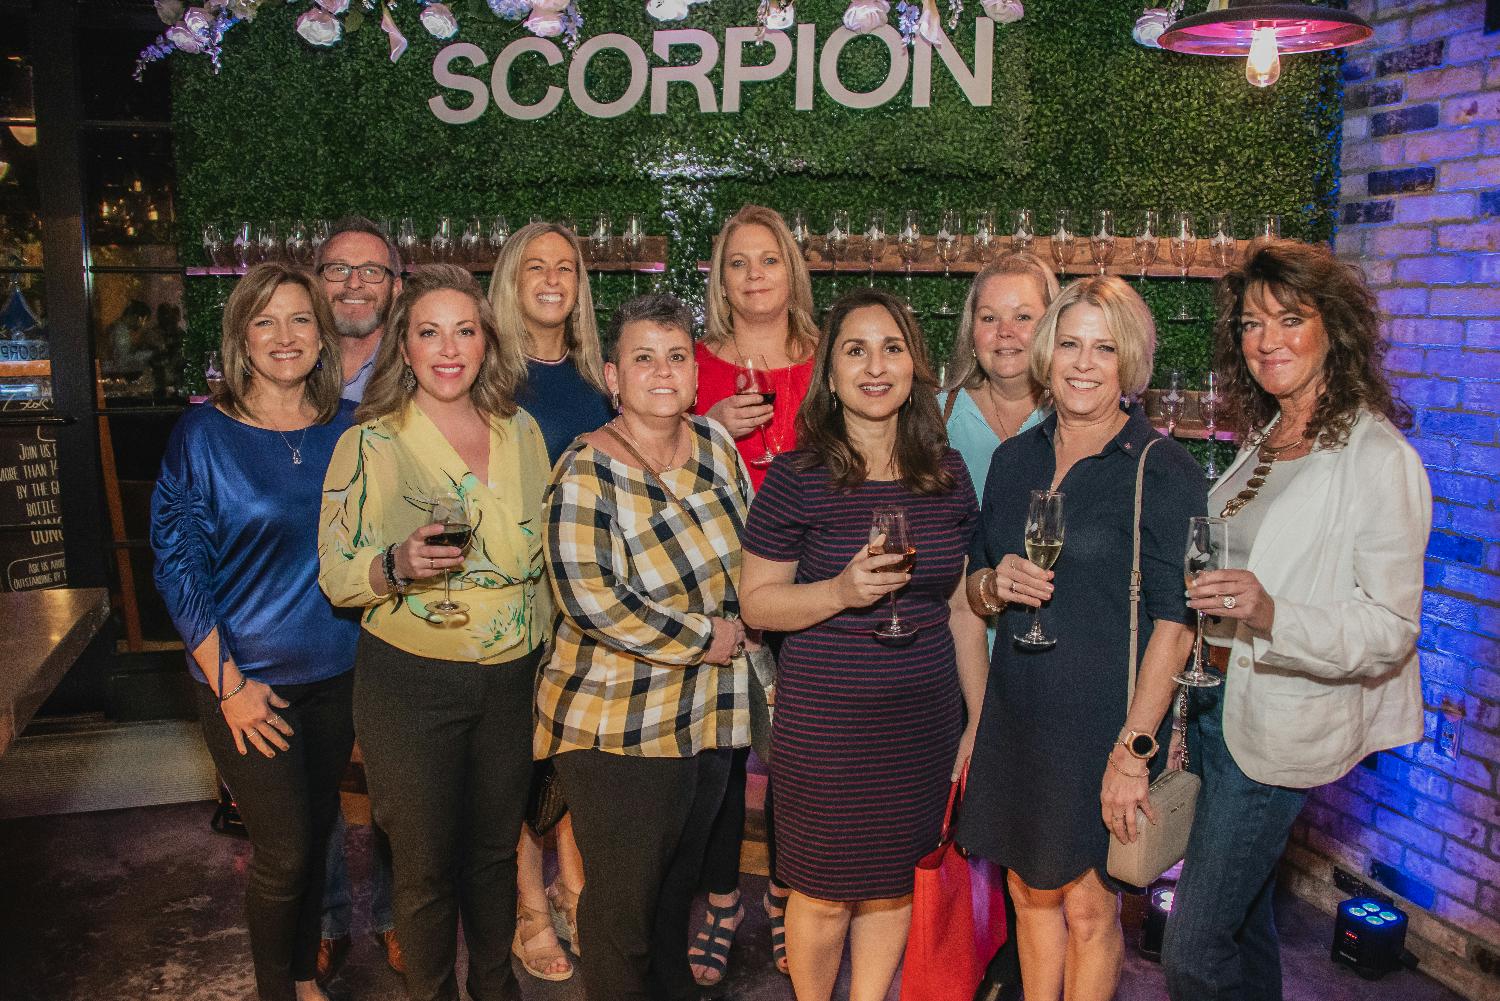 Scorpion hosted event at International Franchise Association's Annual Convention in Orlando, Florida.